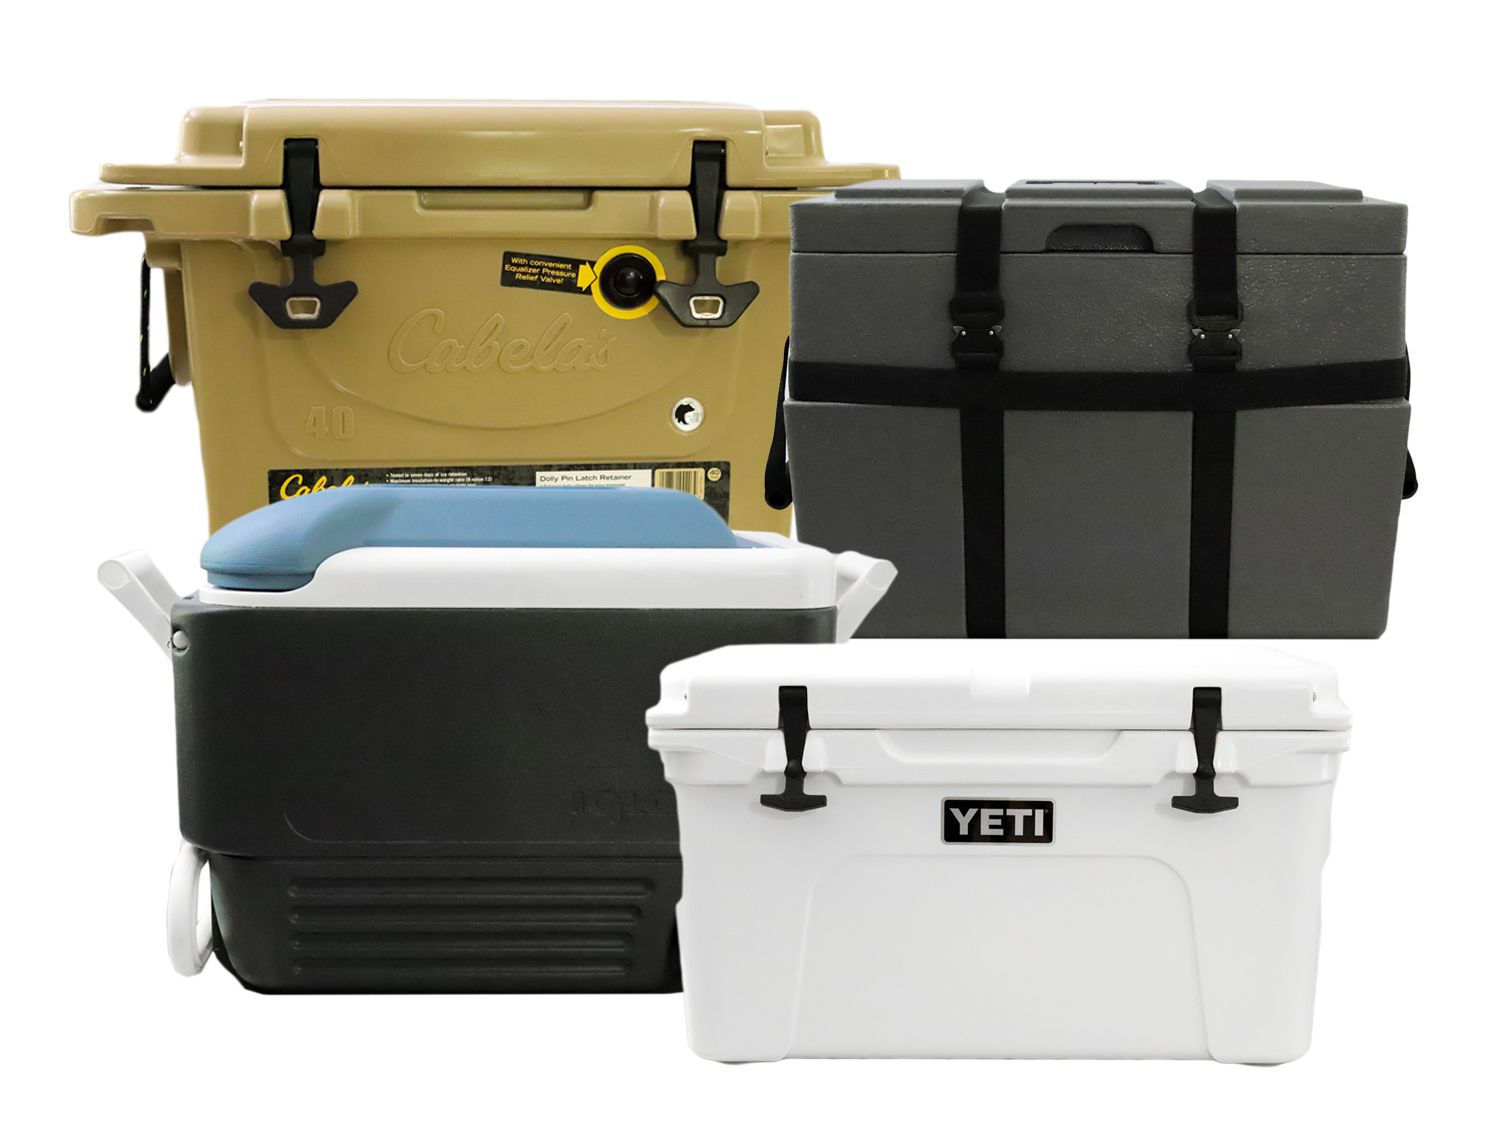 The Best Coolers for Parties